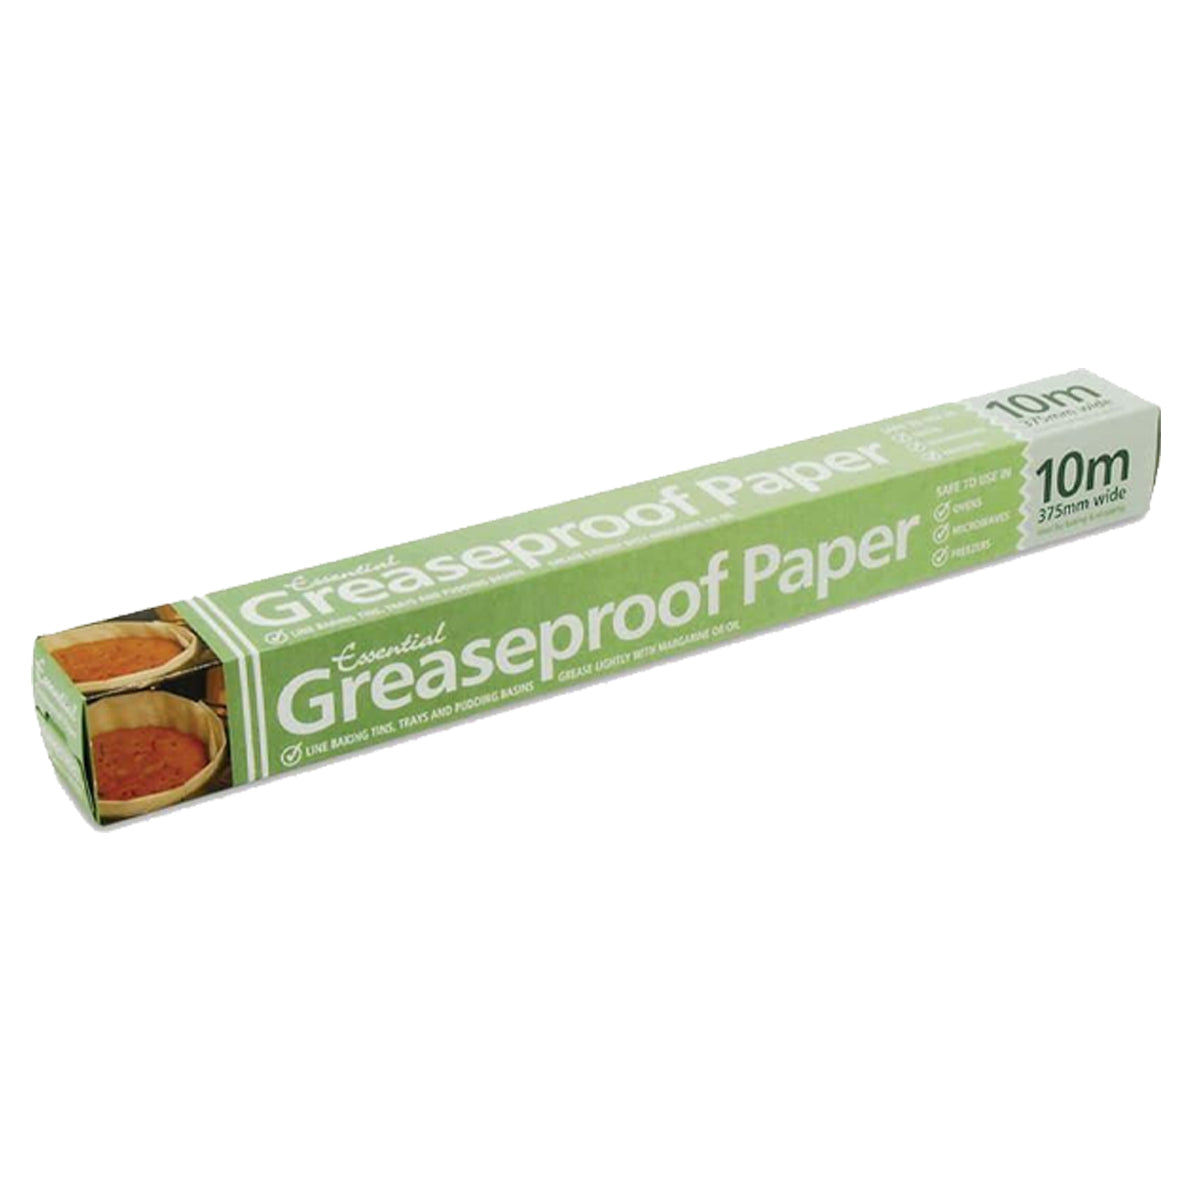 Essential - Greaseproof Paper - 10m - Continental Food Store